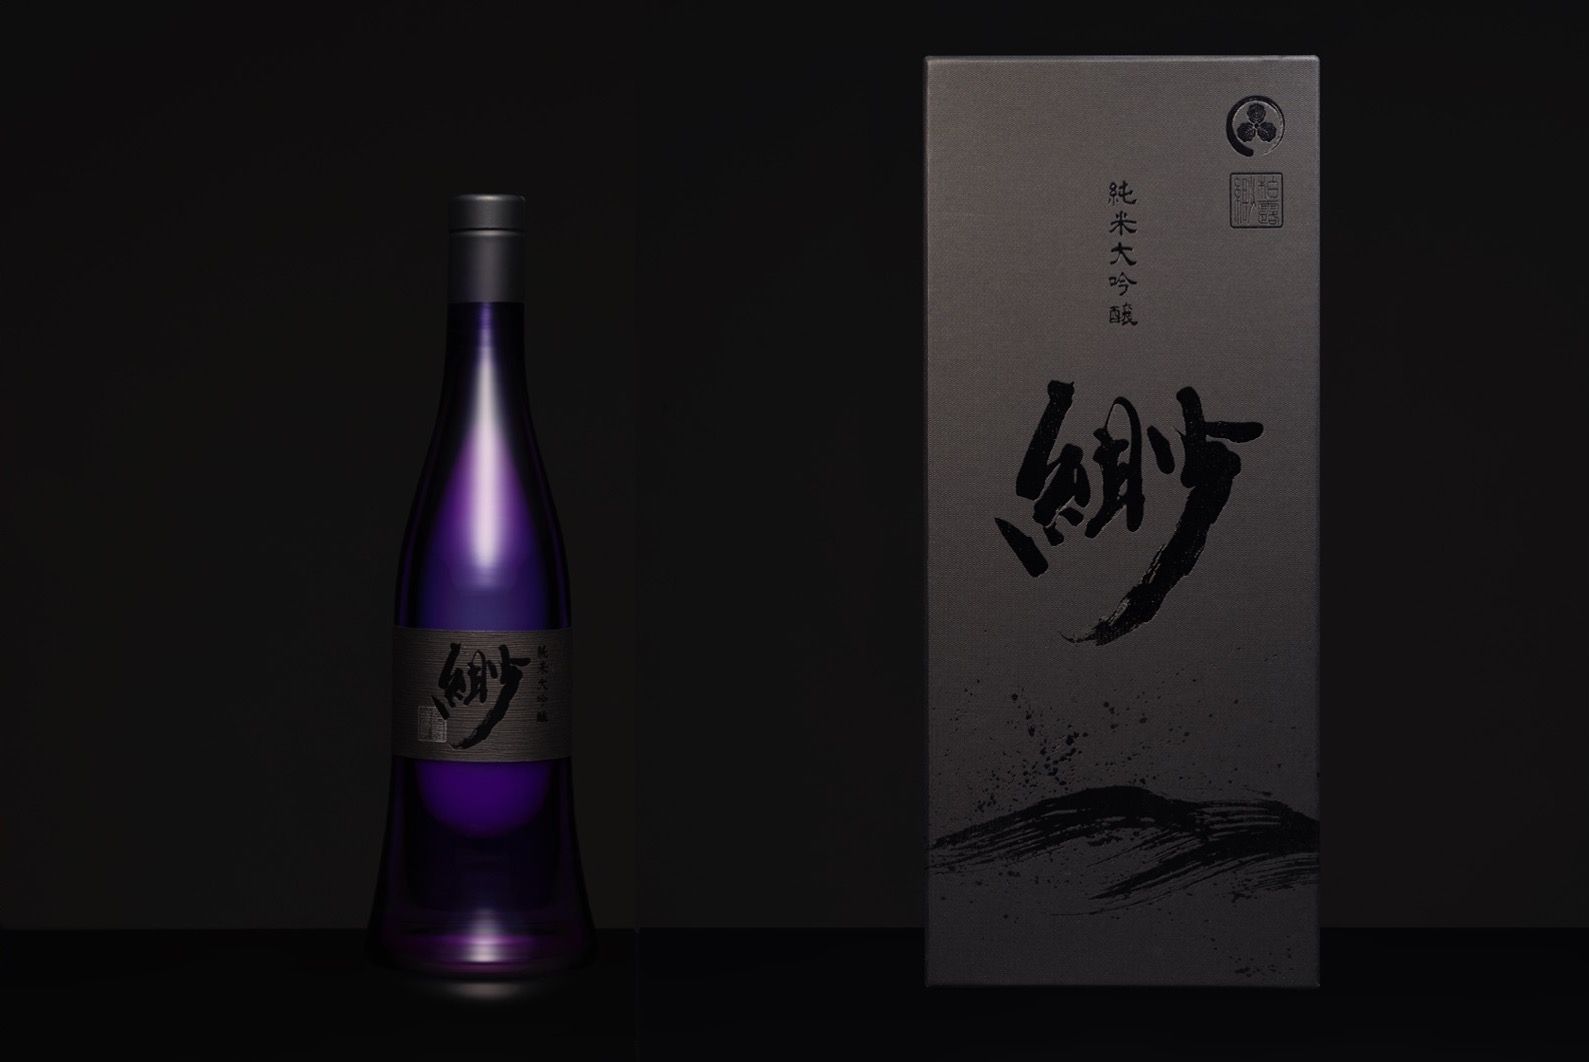 UNITY ZERO LIMITED starts Japanese sake promotion project targeting wealthy people in Asia with the first brand, ‘BYO’, in cooperation with HAKURO SHUZO.